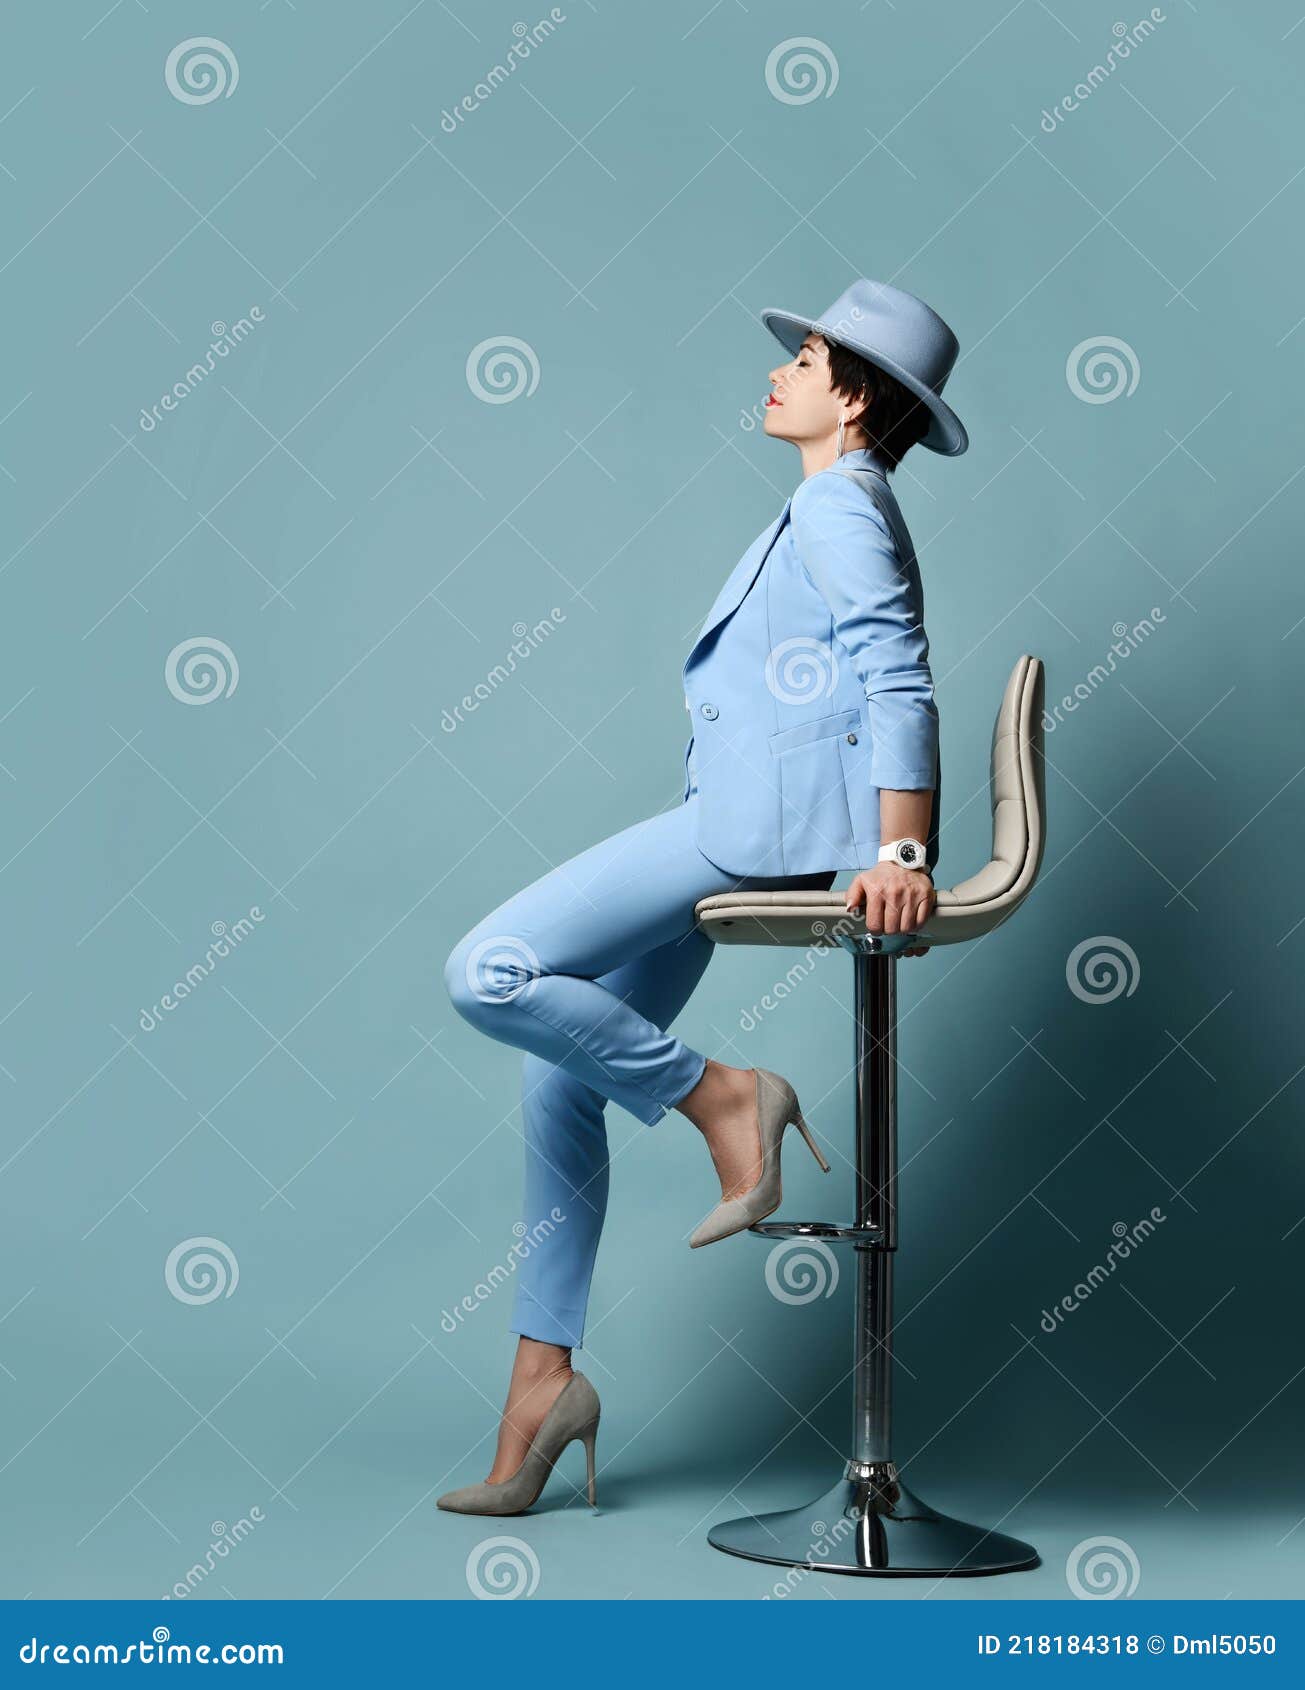 Full Growth Portrait Of Short Haired Brunette Woman In Blue Business Suit Hat High Heeled